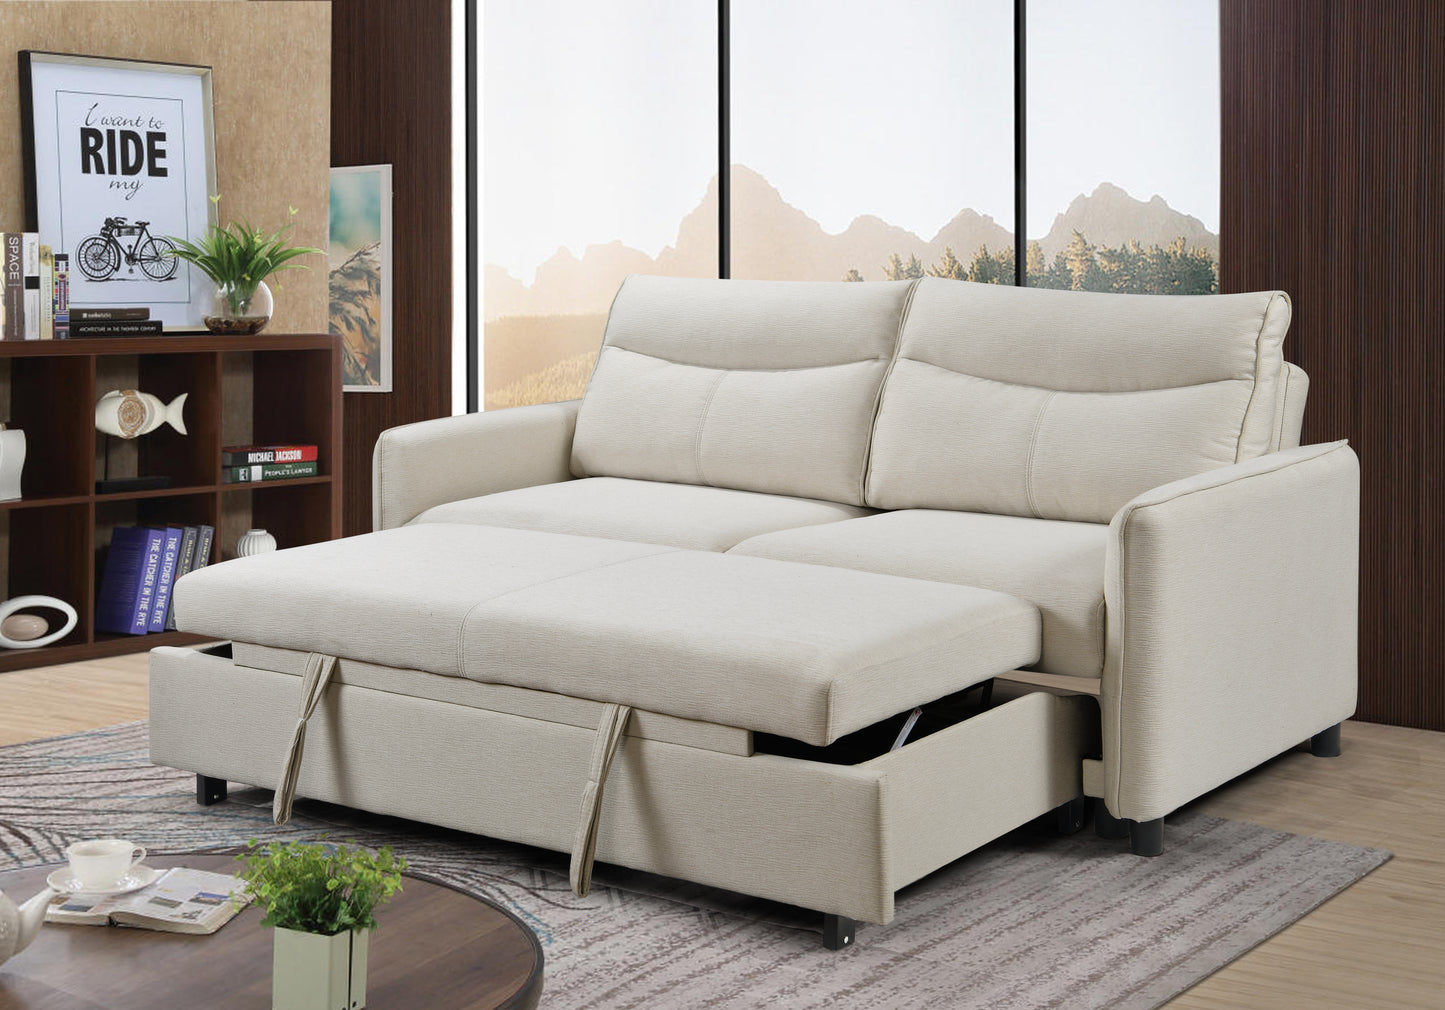 3 in 1 Convertible Sleeper Sofa Bed Modern Fabric Loveseat Futon Sofa Couch w/Pullout Bed Beige